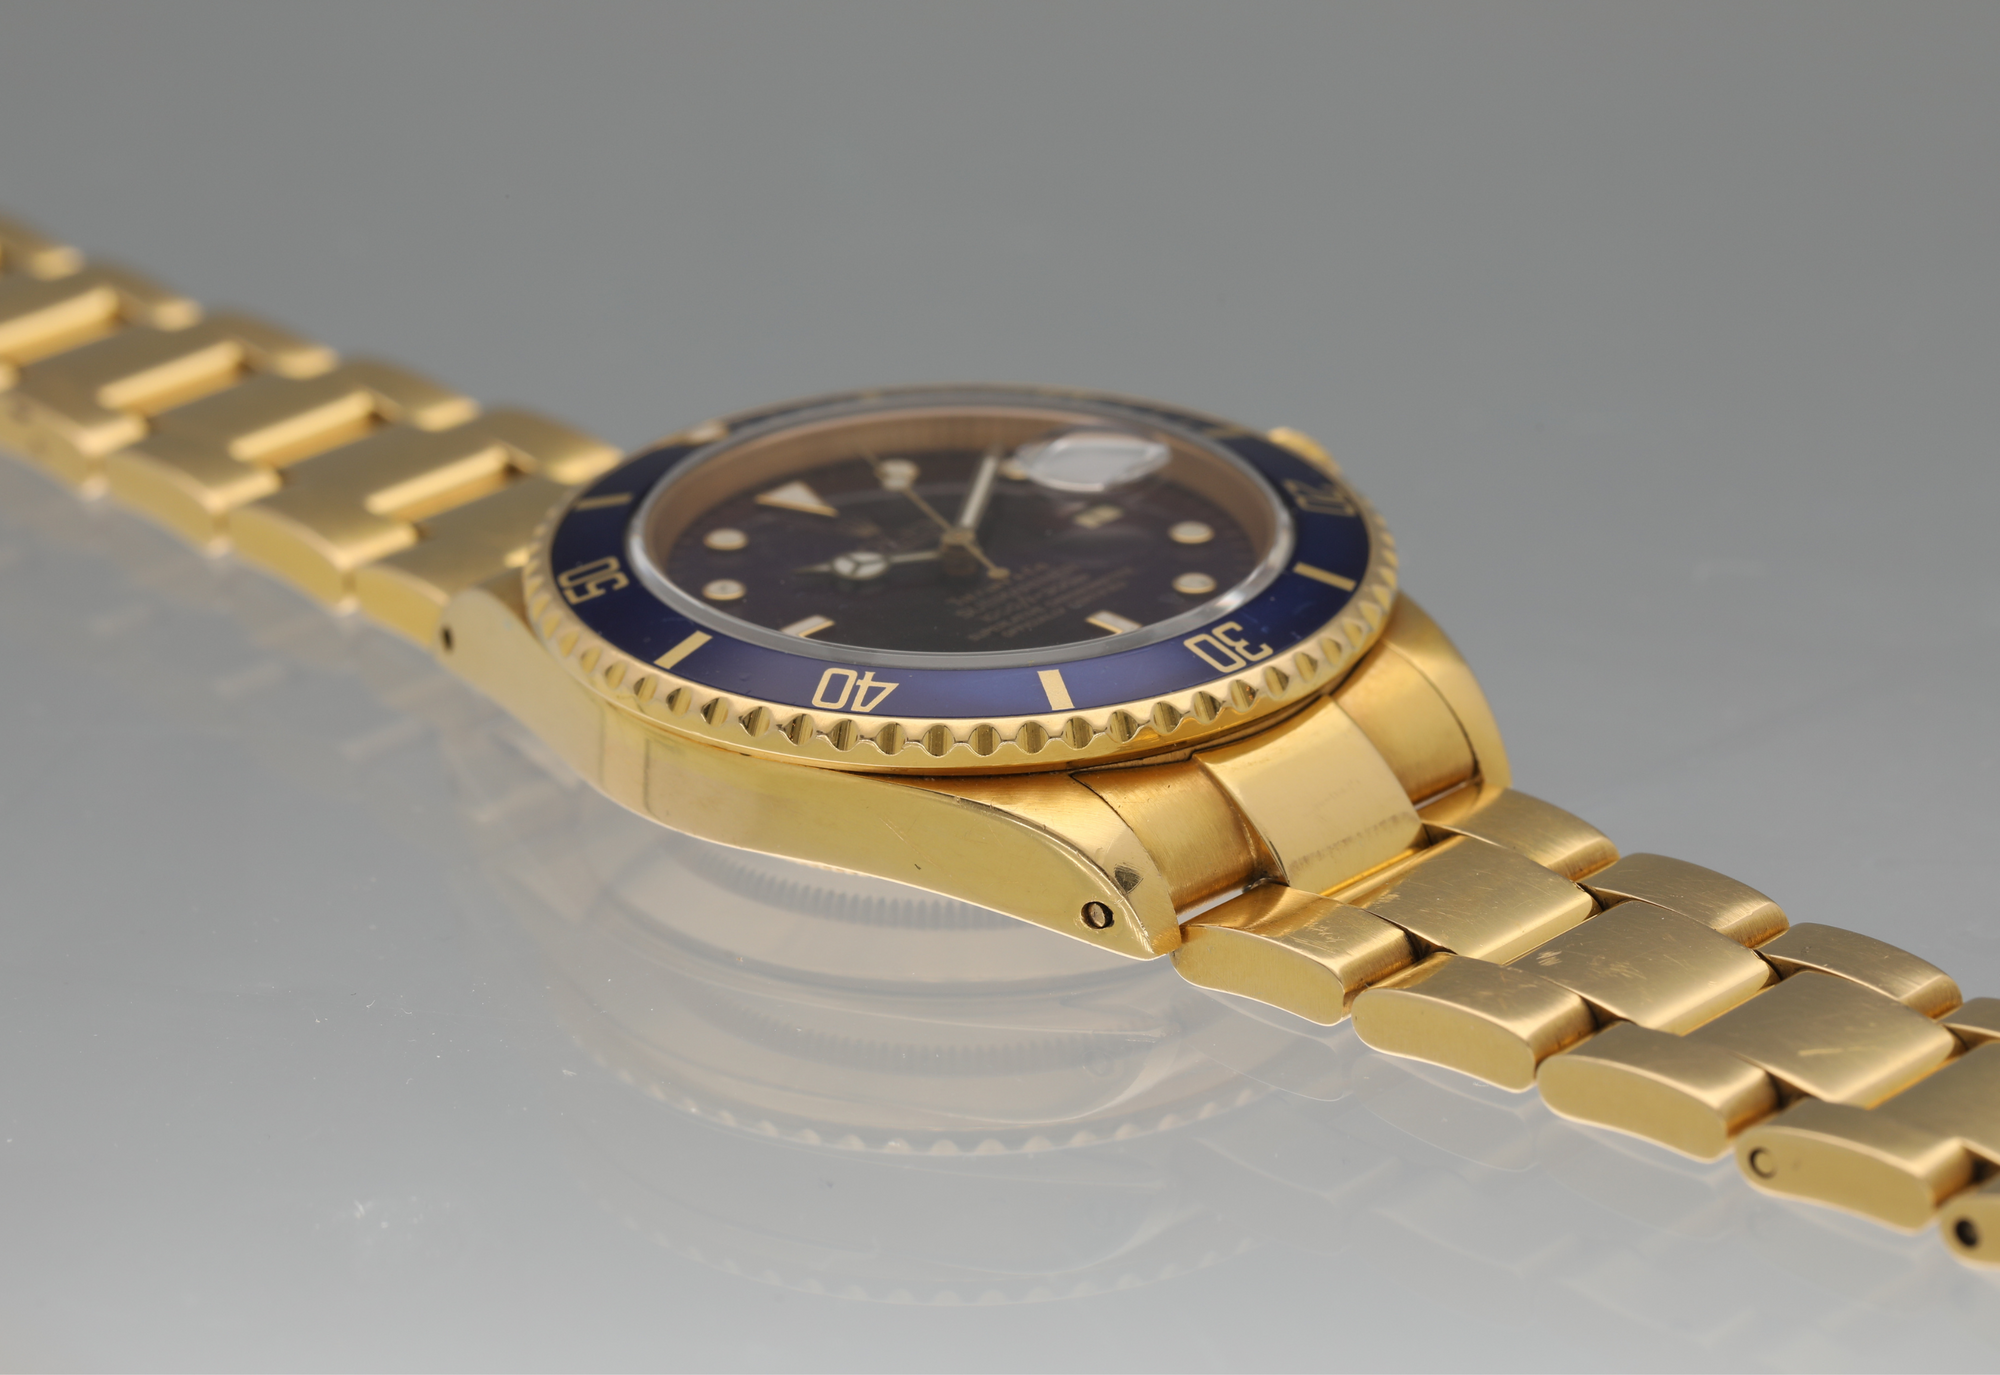 Tiffany Gold Submariner from the 80s